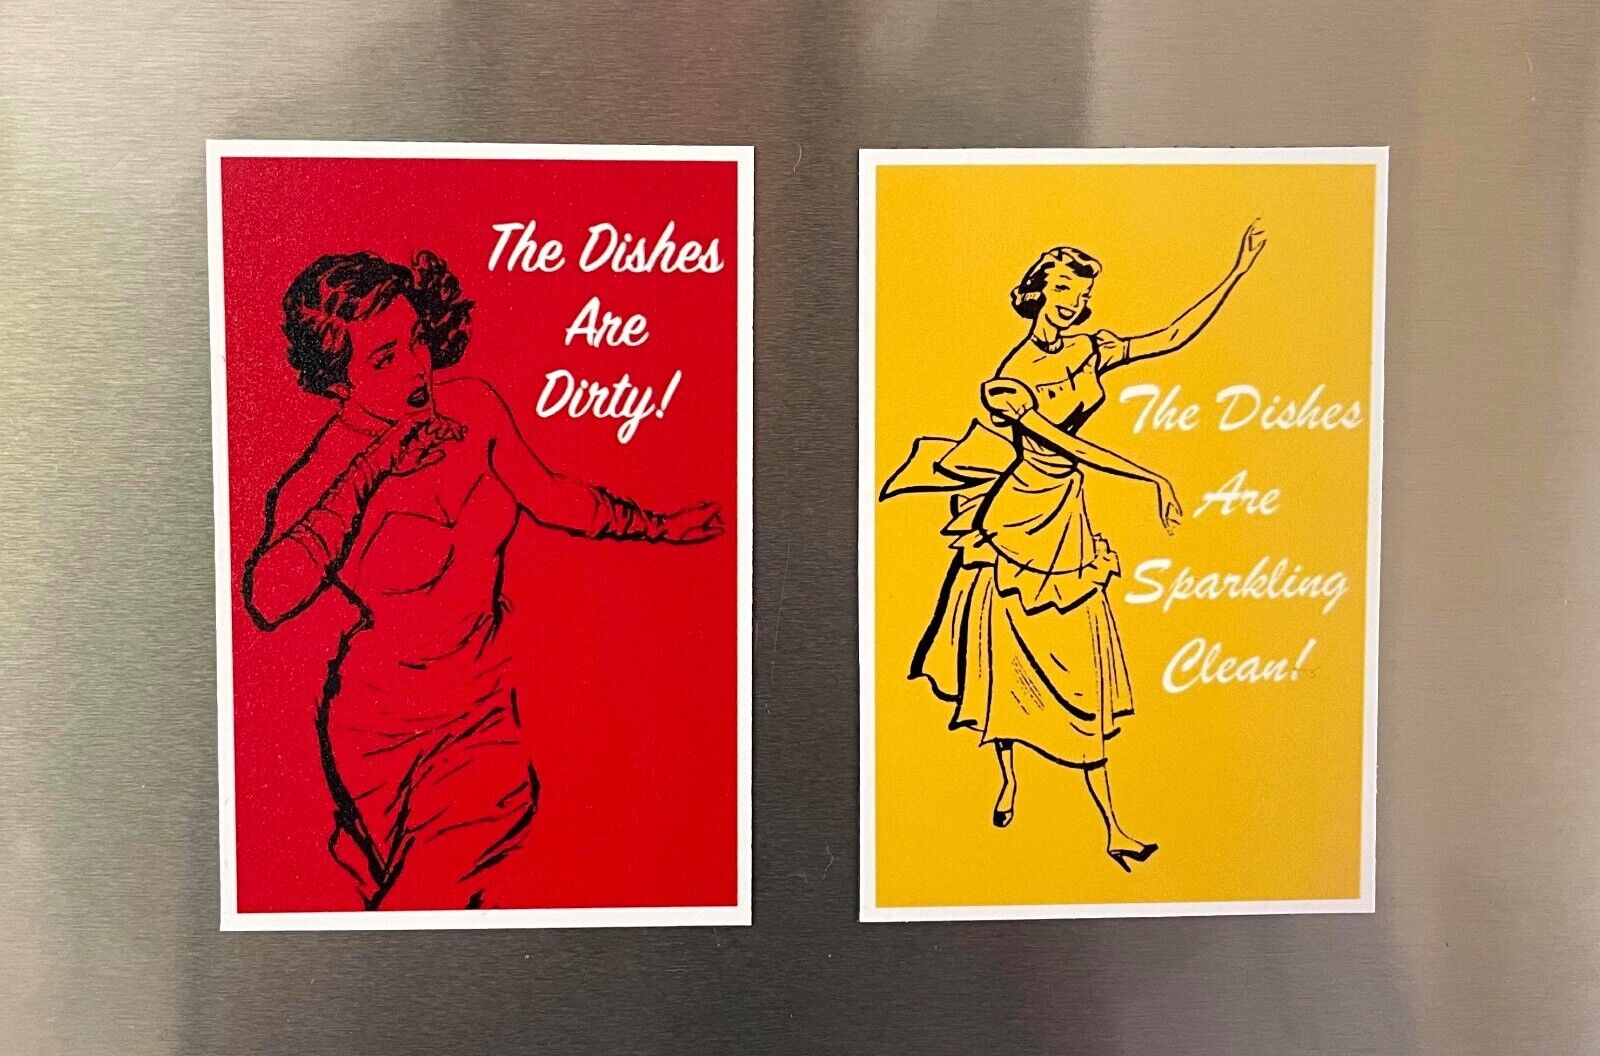 Funny Vintage Lady Dishwasher Magnets Dishes Are Clean Dirty Cute 2.25”x3.25”